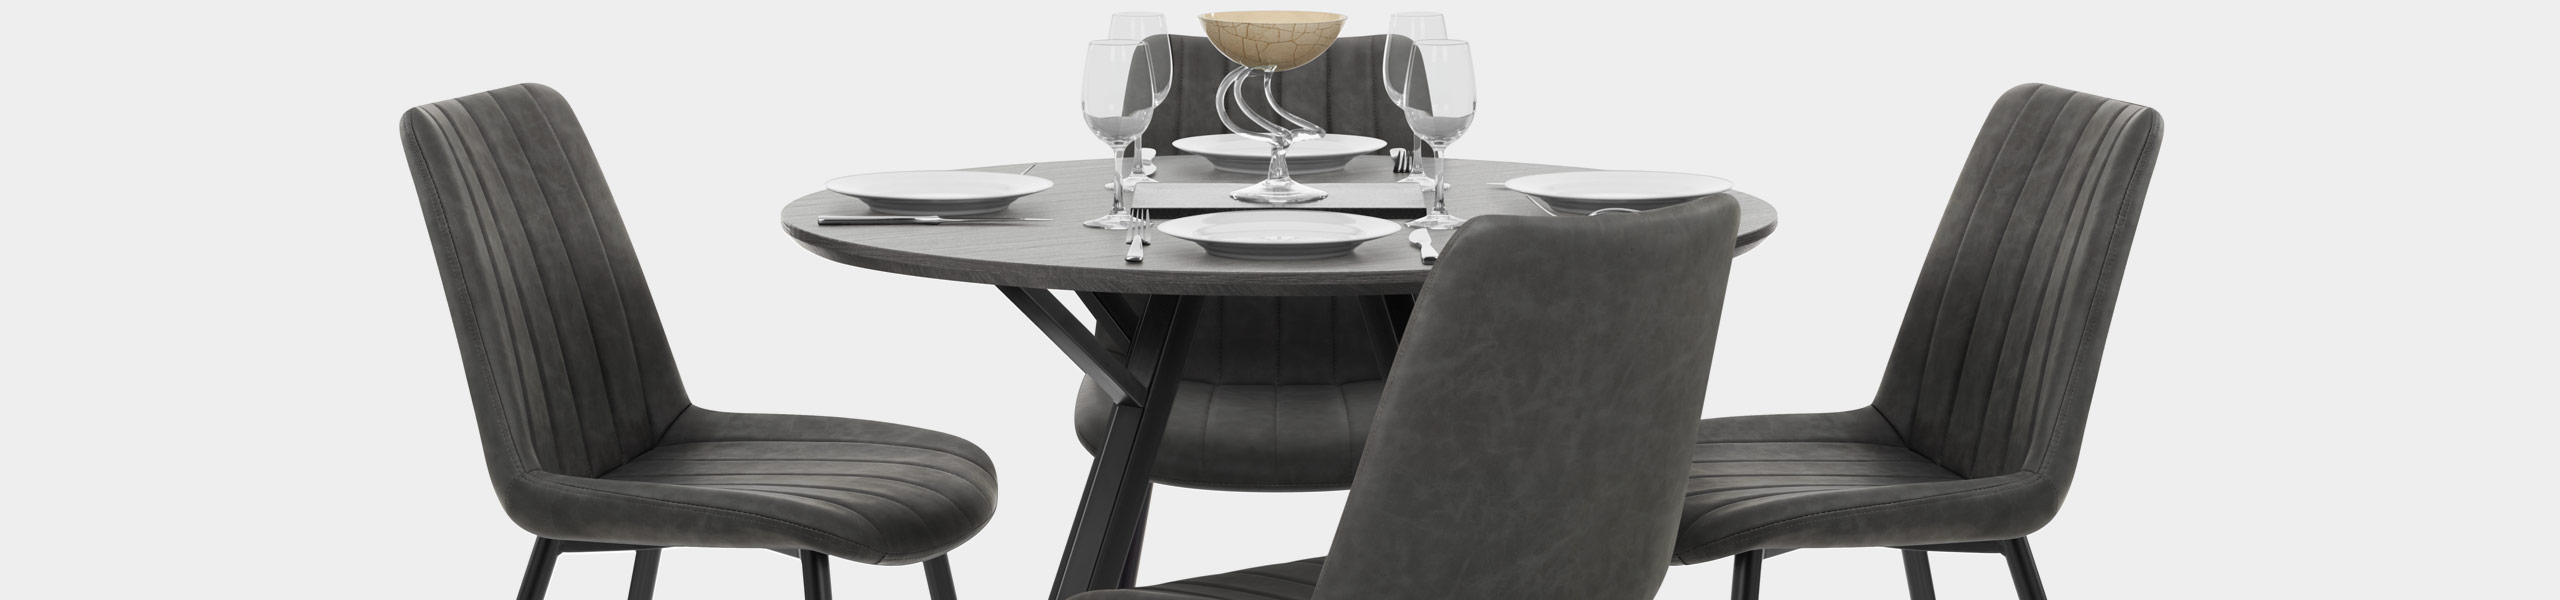 Sussex Dining Set Grey Wood & Charcoal Video Banner